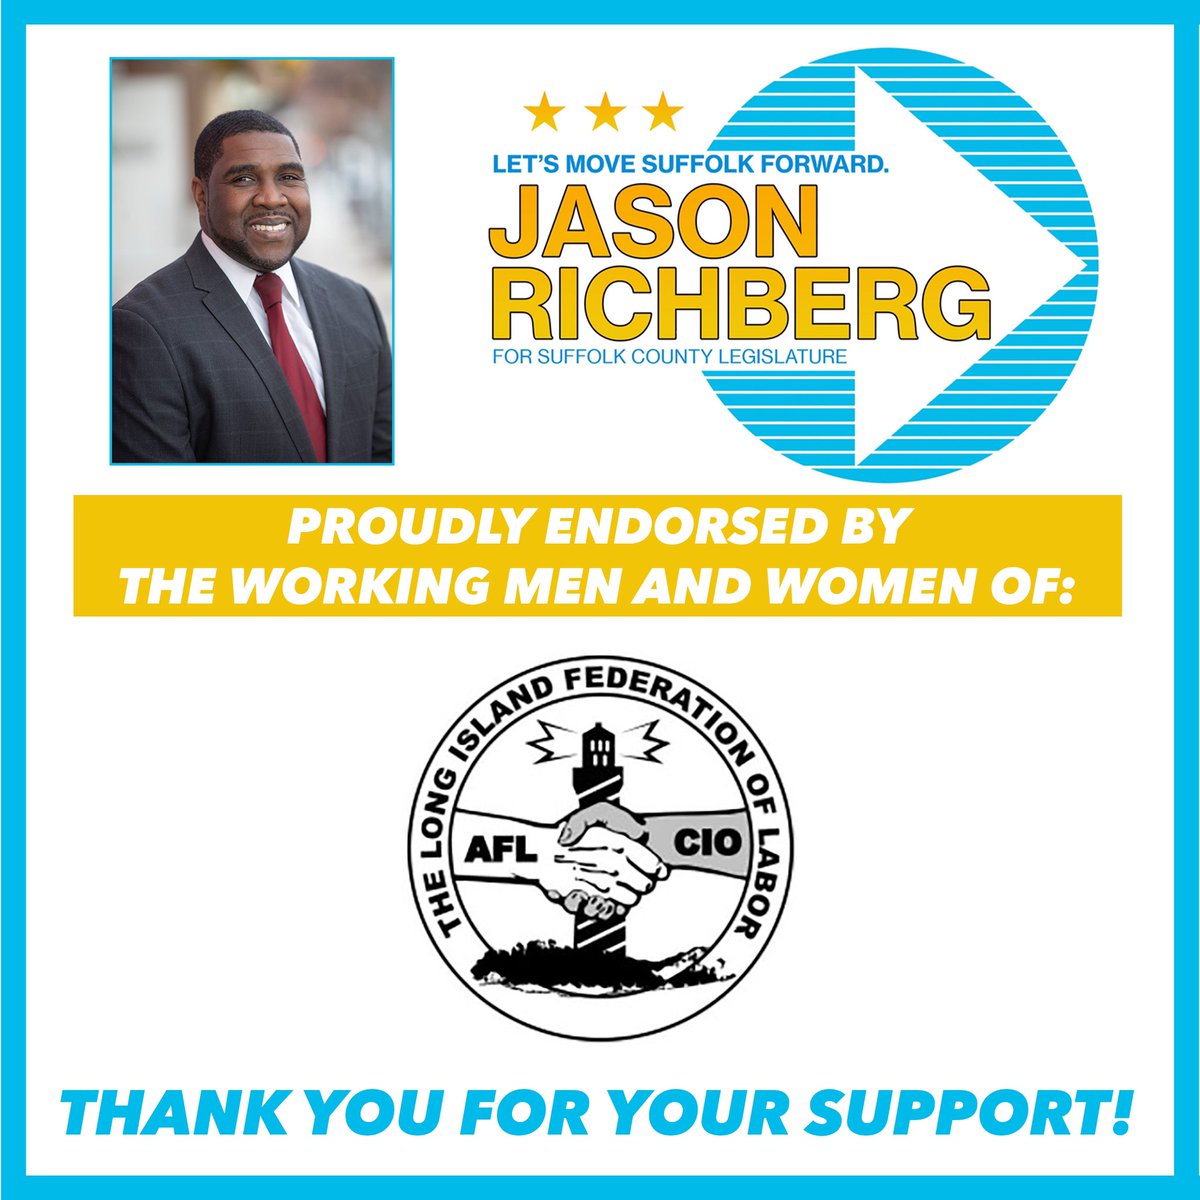 Proud to have the endorsement of the Long Island Federation of Labor, AFL-CIO.